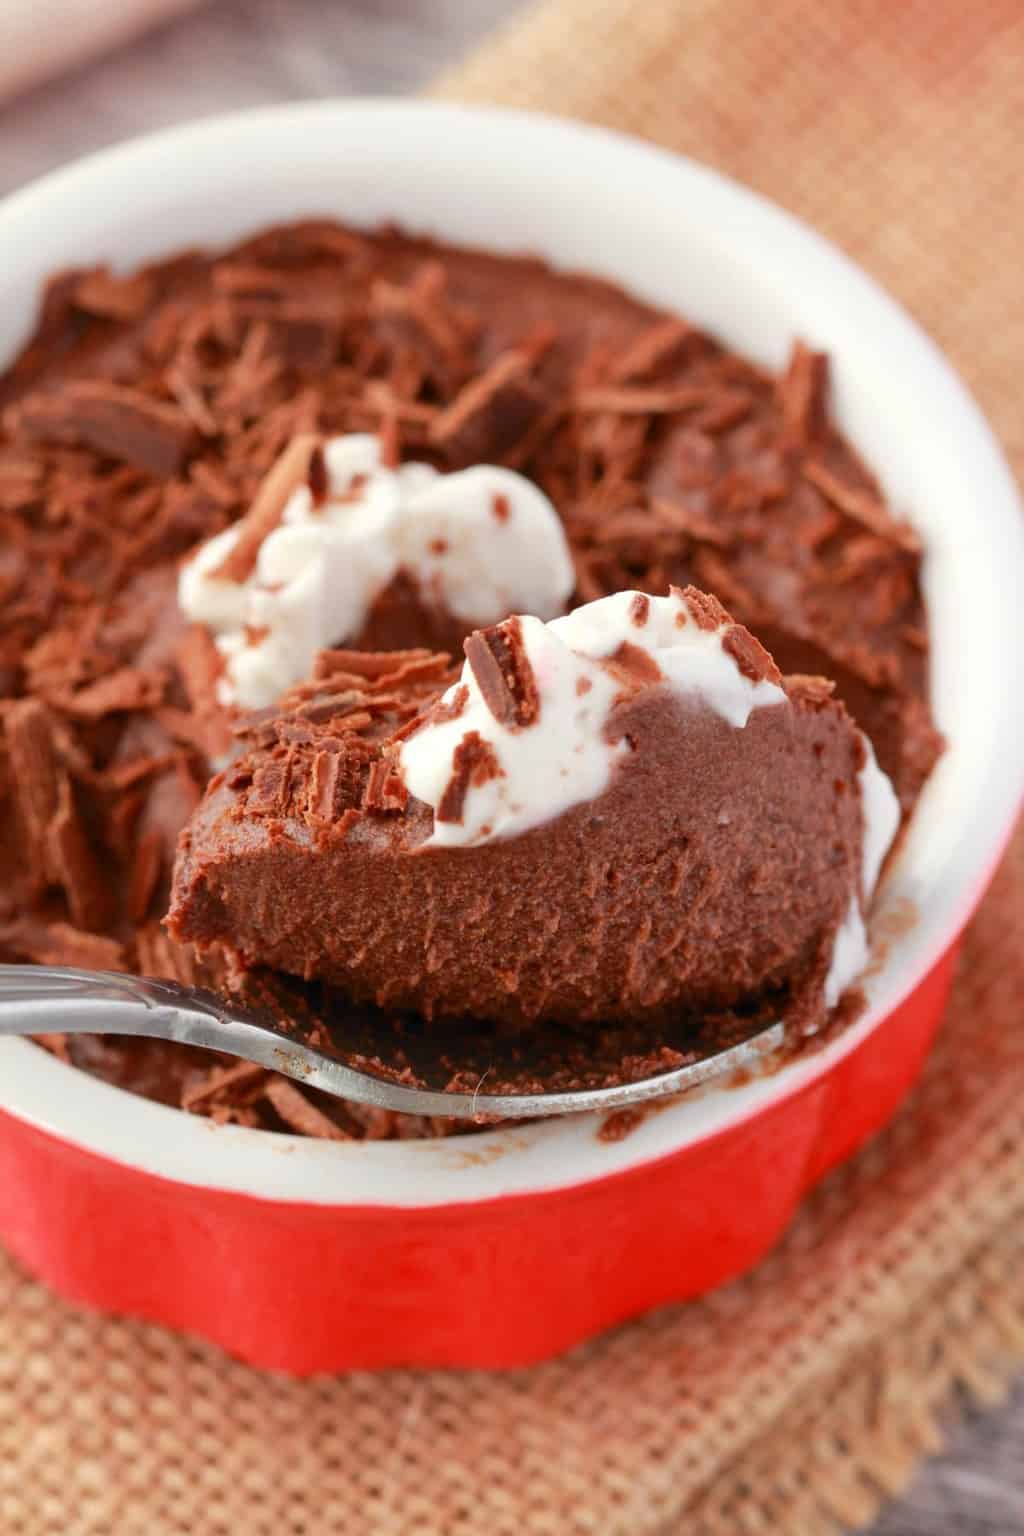 Vegan chocolate mousse in a red and white ramekin with a teaspoon.